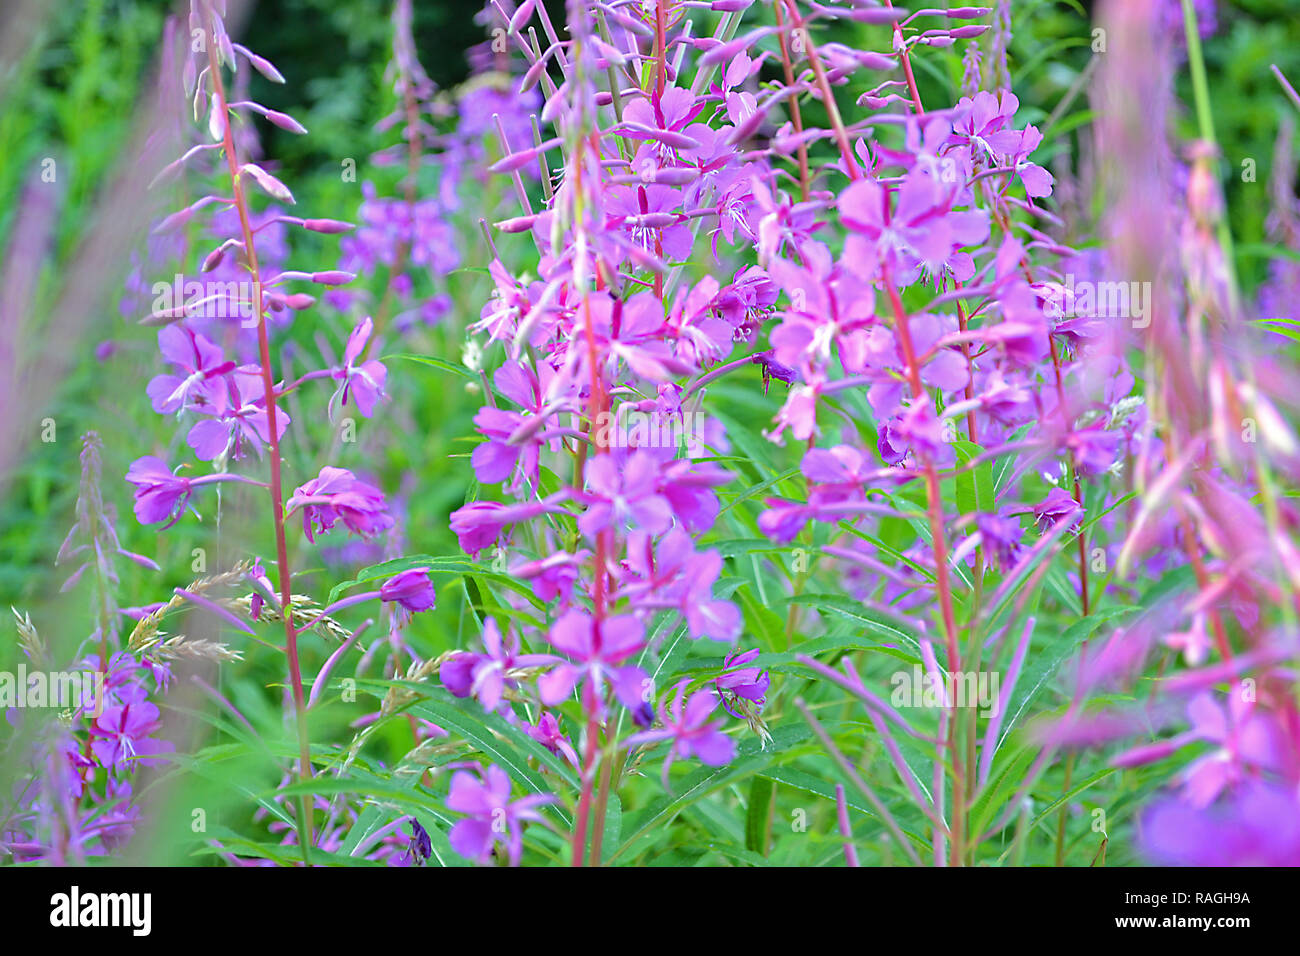 Rosebay willowherb grows in profusion in woodland clearings in the North Downs, here at One Tree Hill, Sevenoaks, Kent, on the Greensand Ridge. July Stock Photo